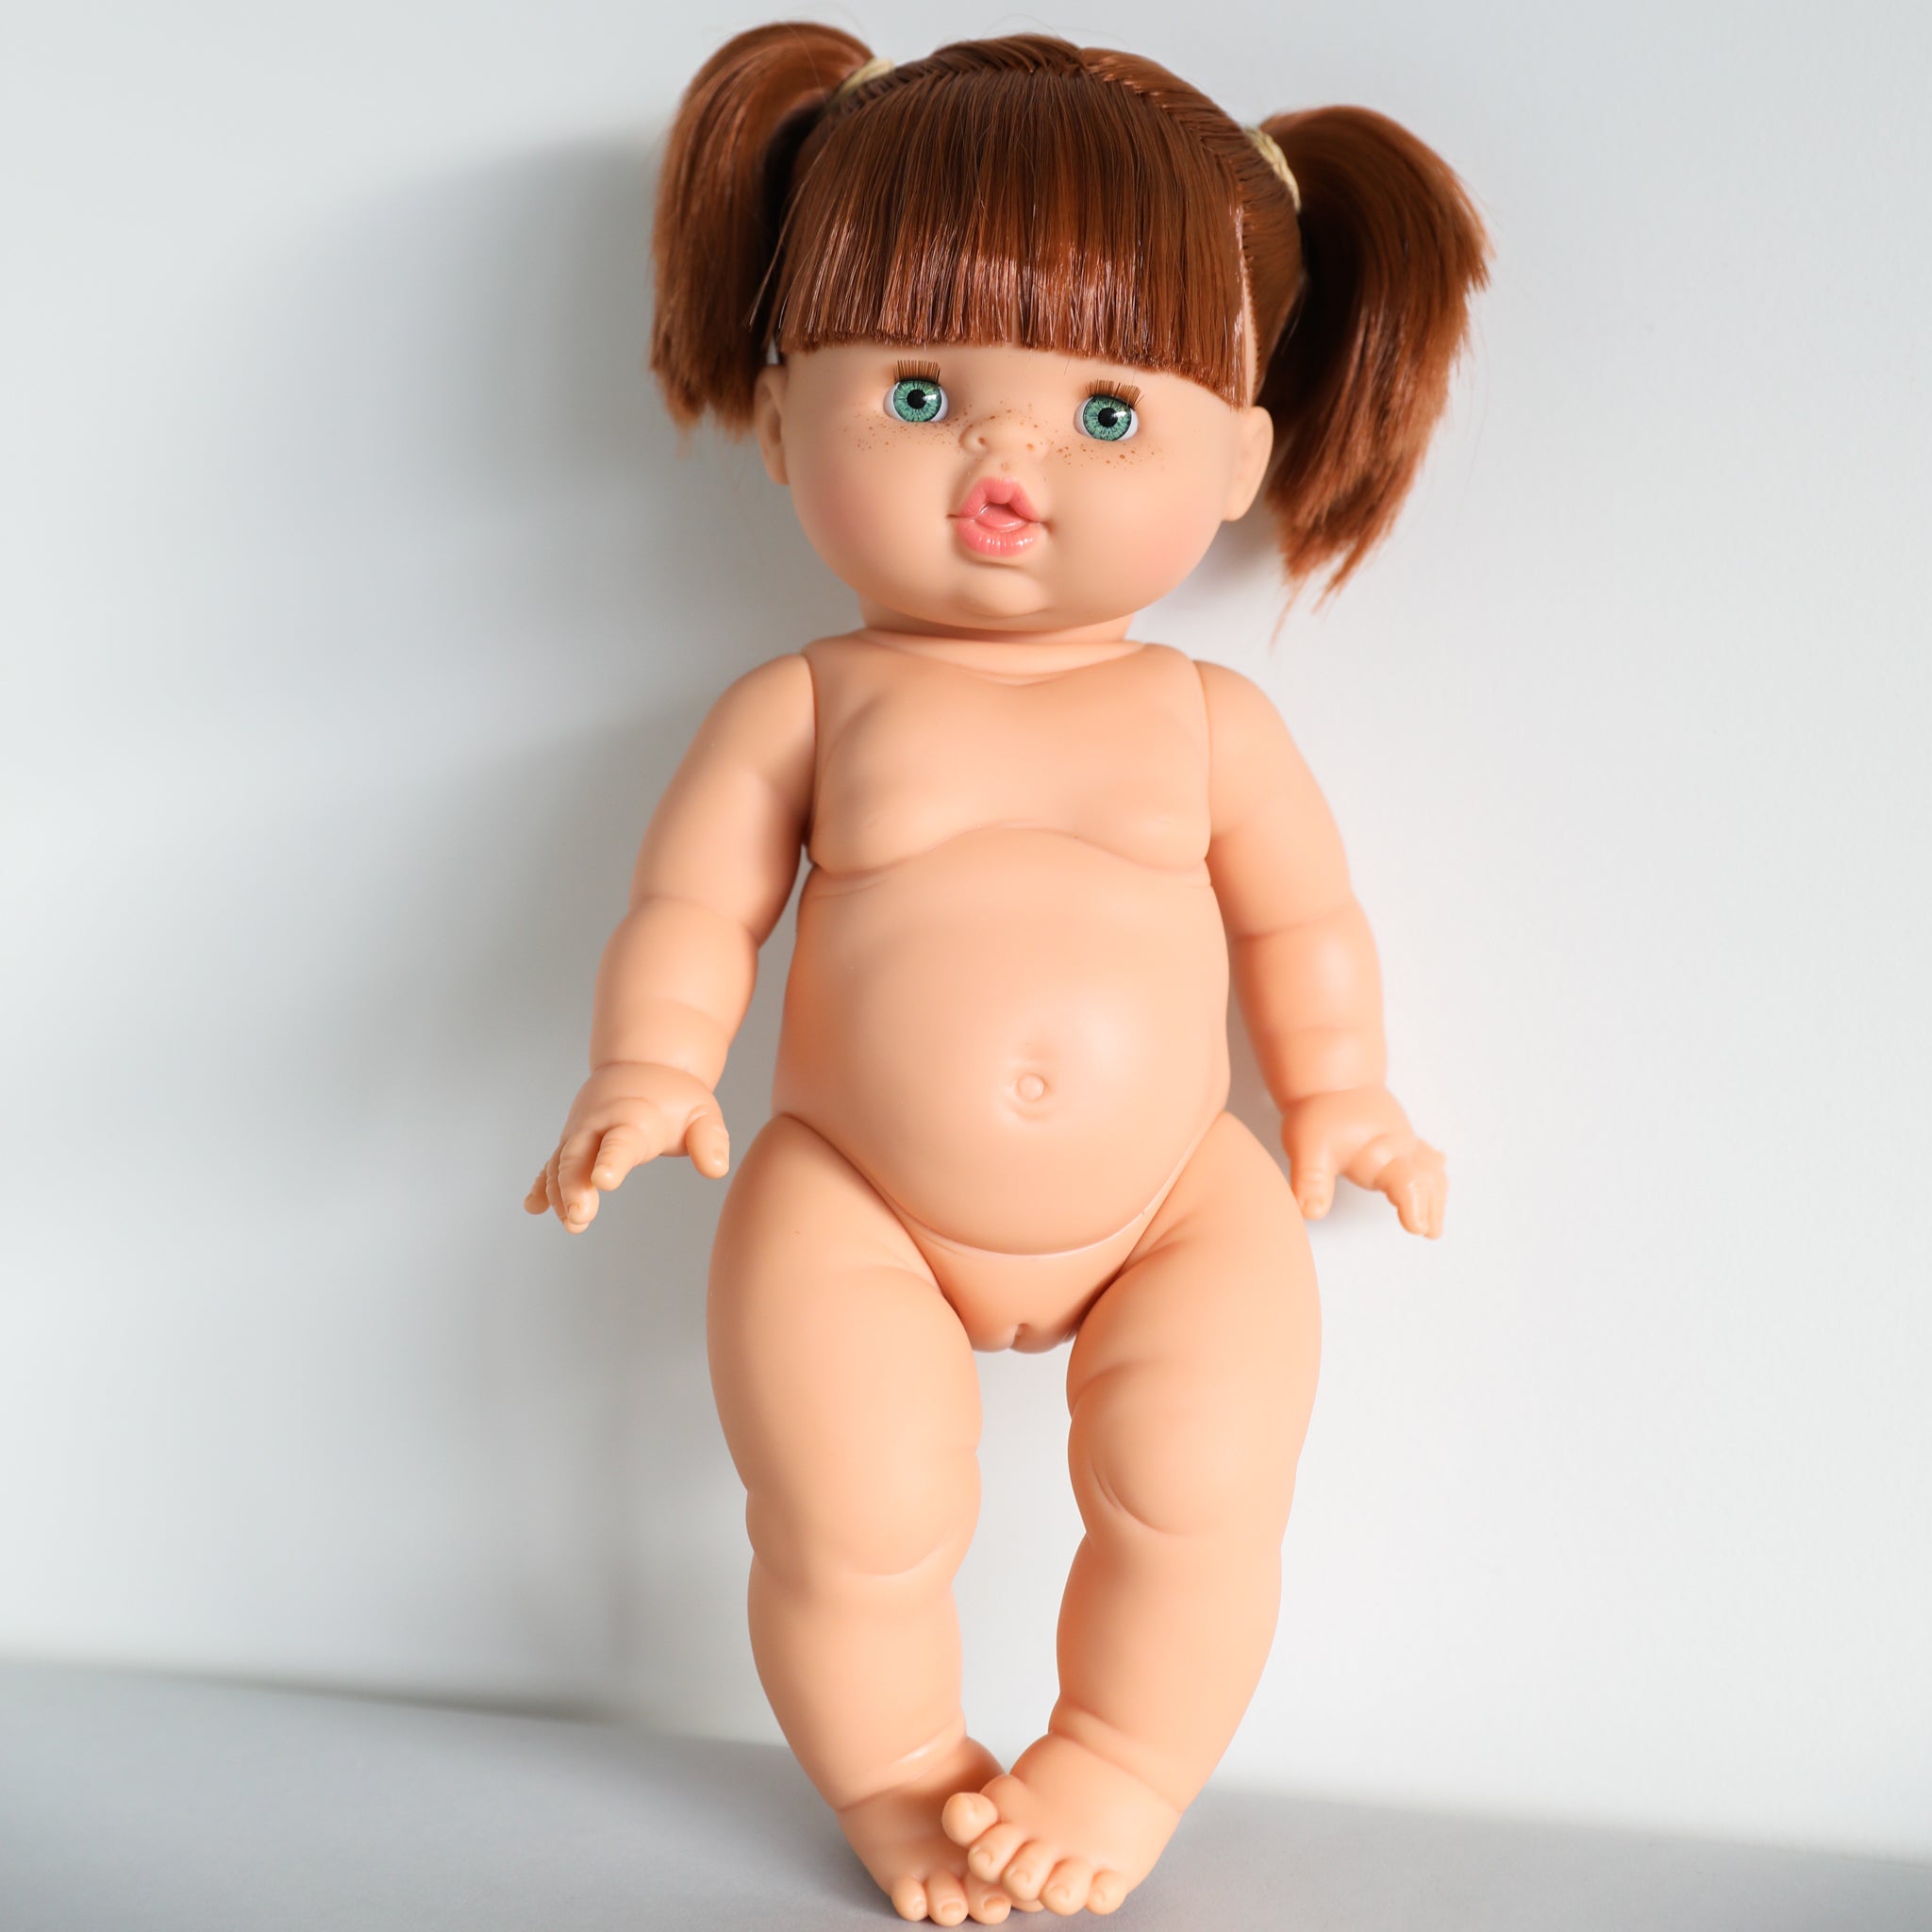 Minikane-doll-without-clothes-09.jpg